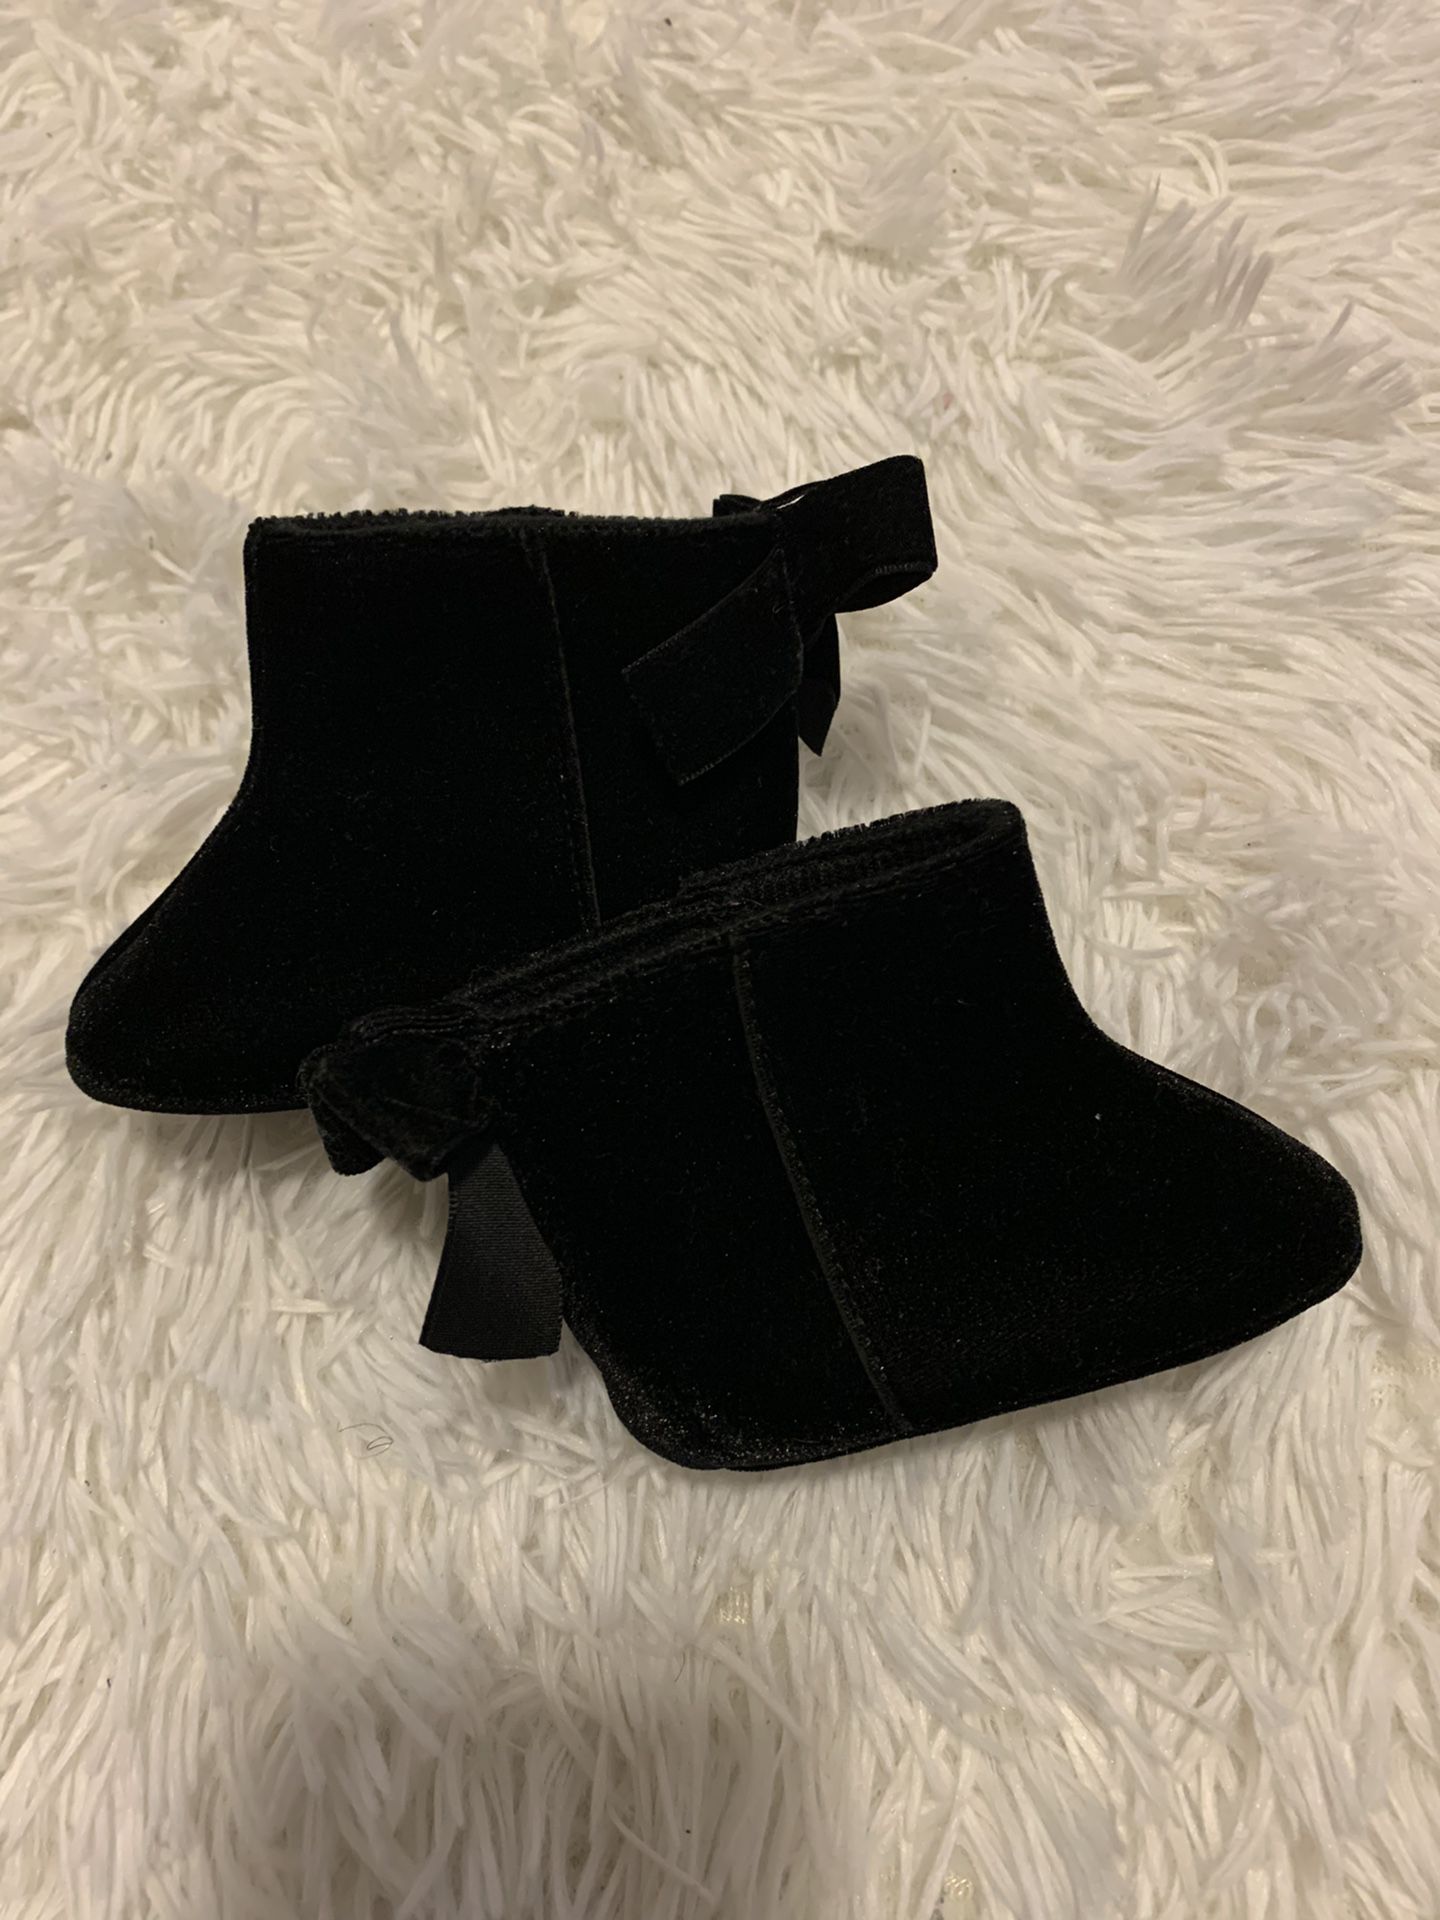 Baby Girl Boots-Brand New